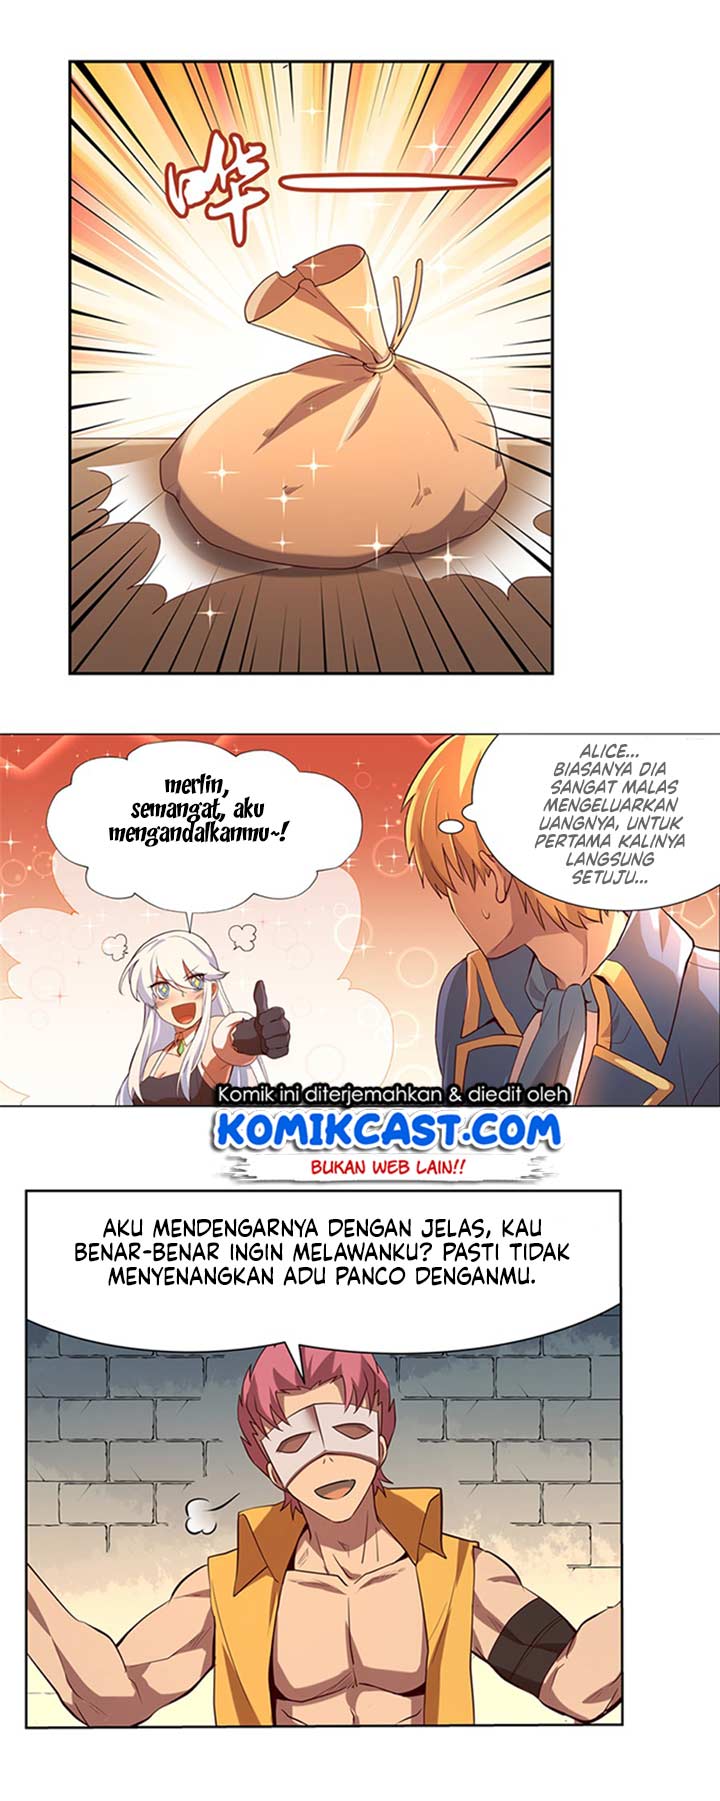 The Demon King Who Lost His Job Chapter 81